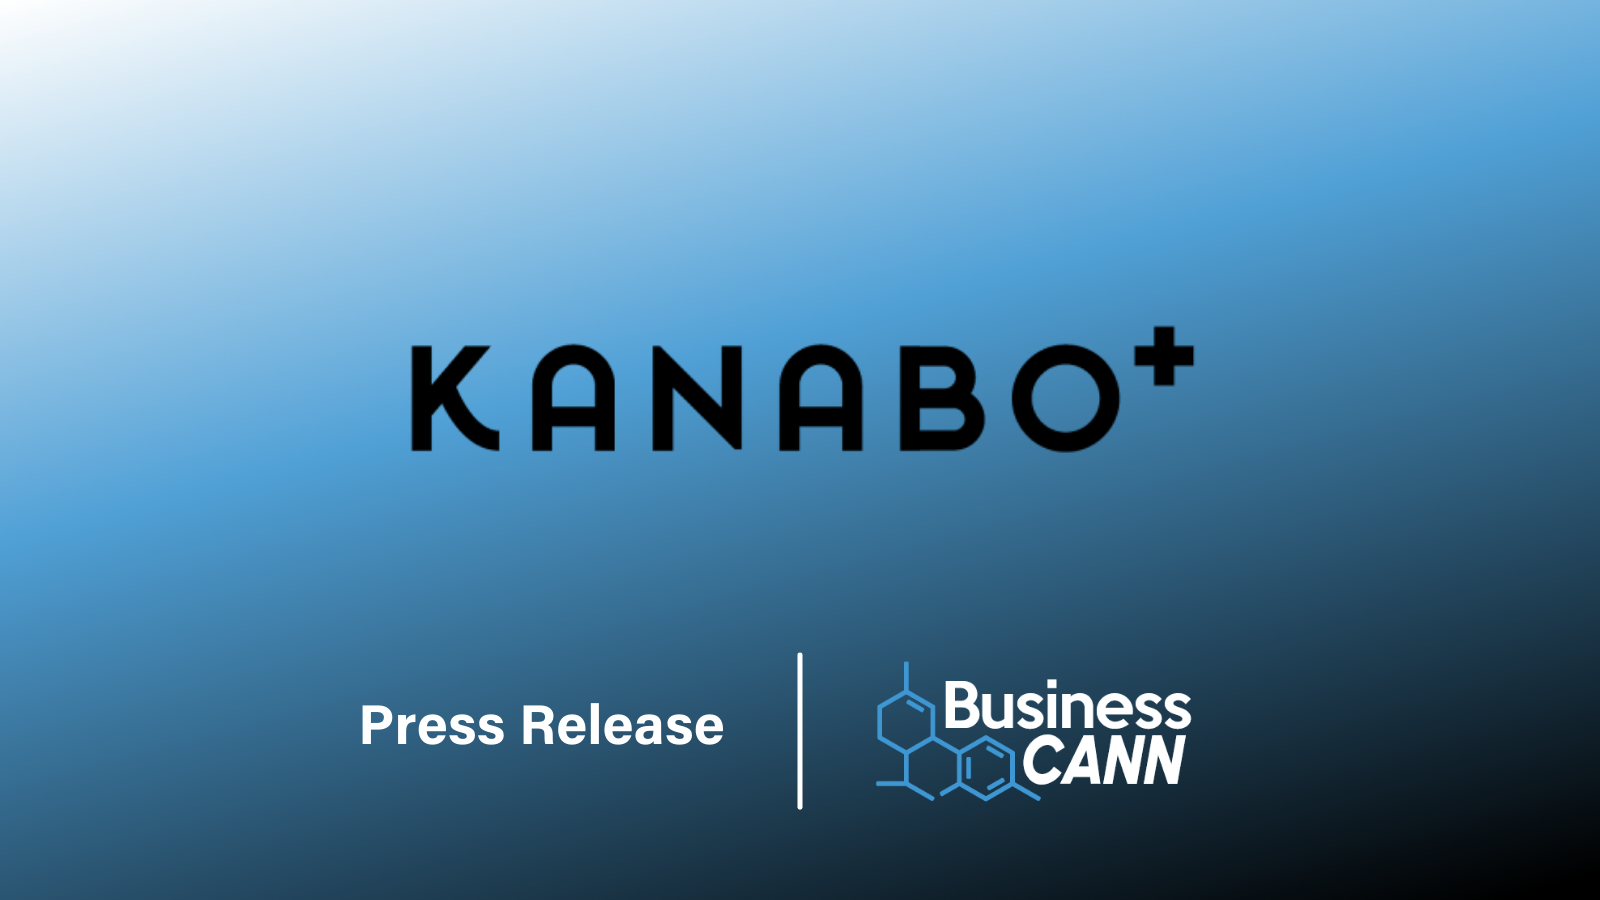 Kanabo Group has been selected as a steering group member for the development of a British Standard for CBD non-tobacco Vape products.